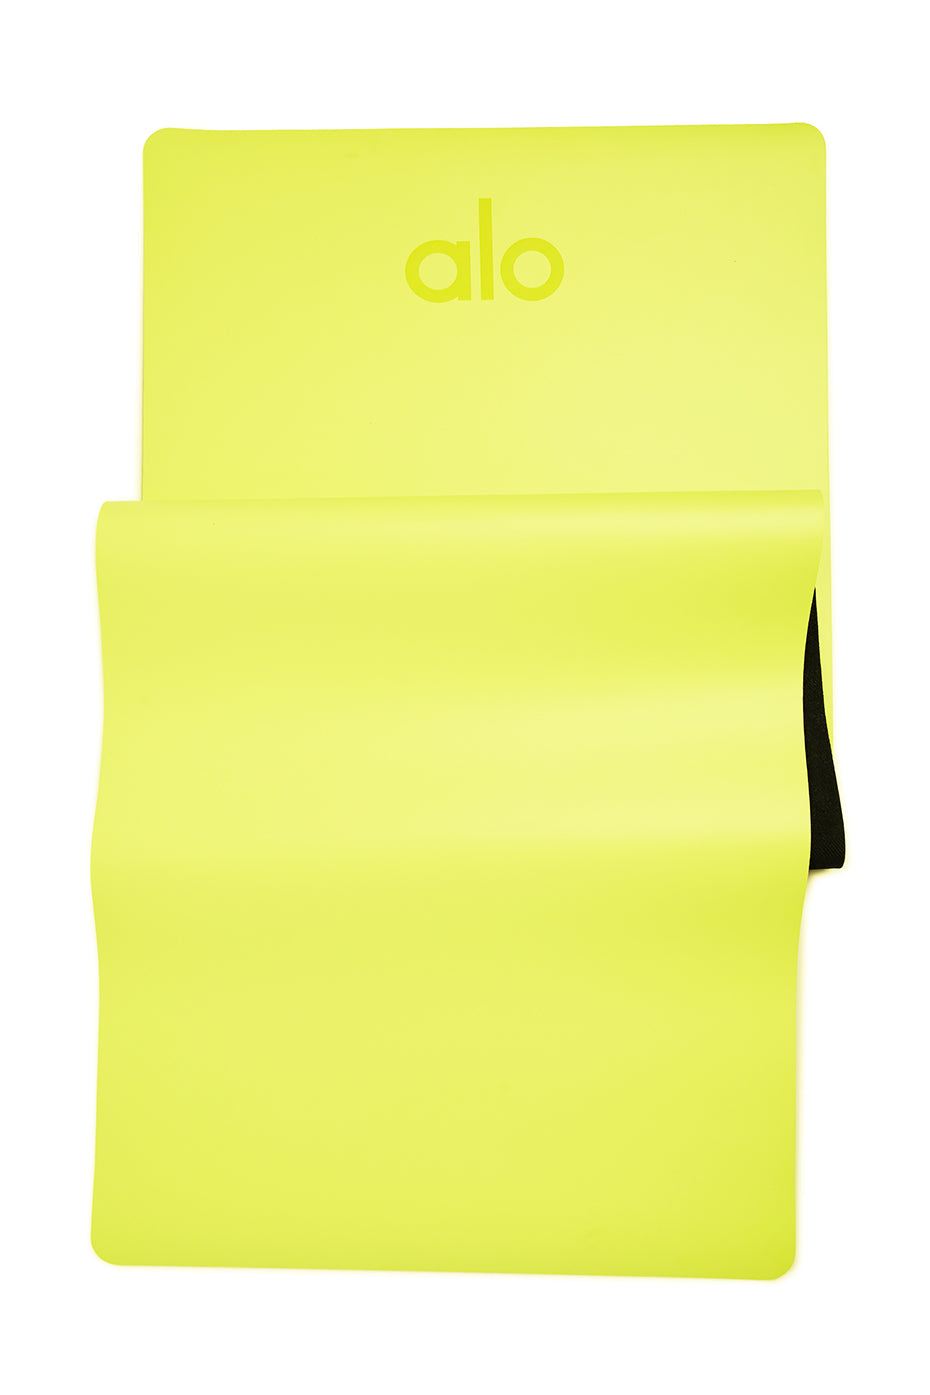 Warrior Mat in Highlighter by Alo Yoga